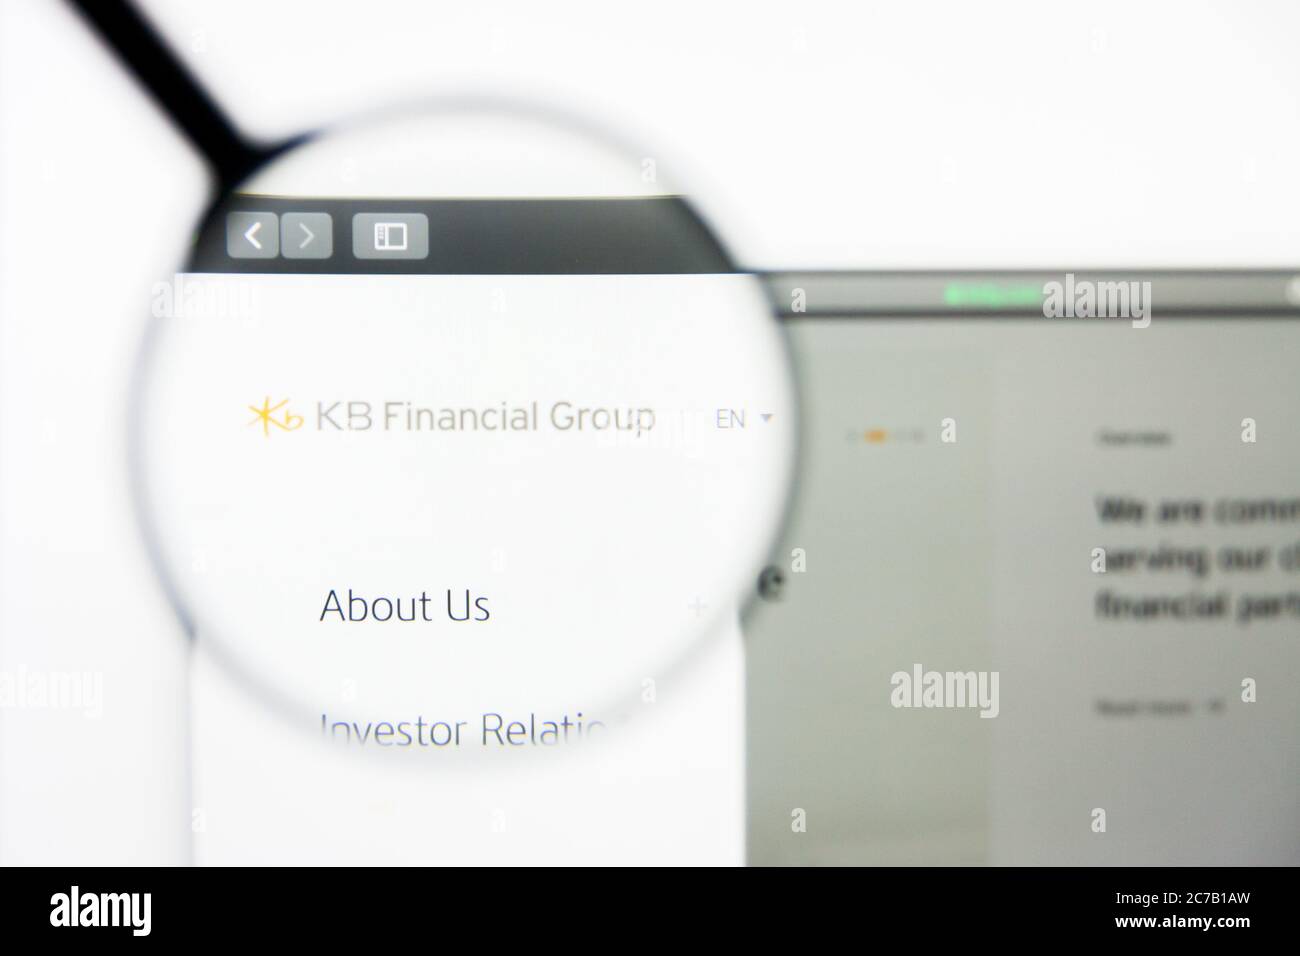 Los Angeles, California, USA - 5 April 2019: Illustrative Editorial of KB Financial Group website homepage. KB Financial Group logo visible on display Stock Photo